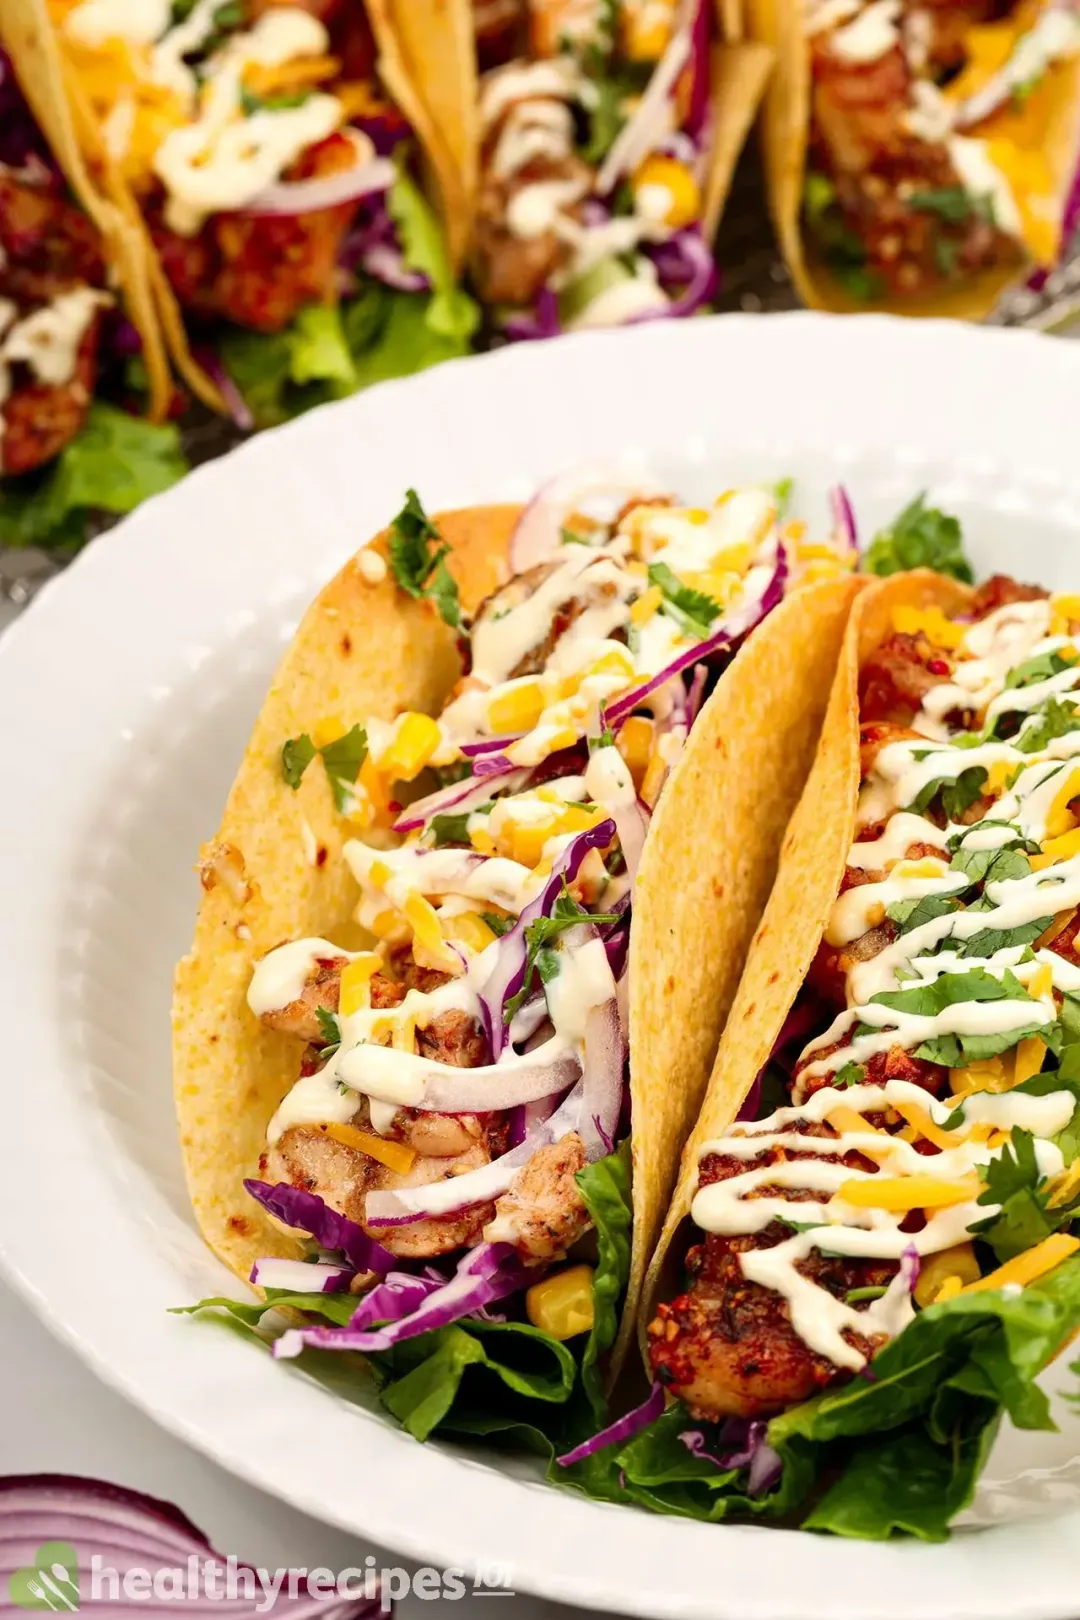 How to Season Chicken for air fryer chicken Tacos